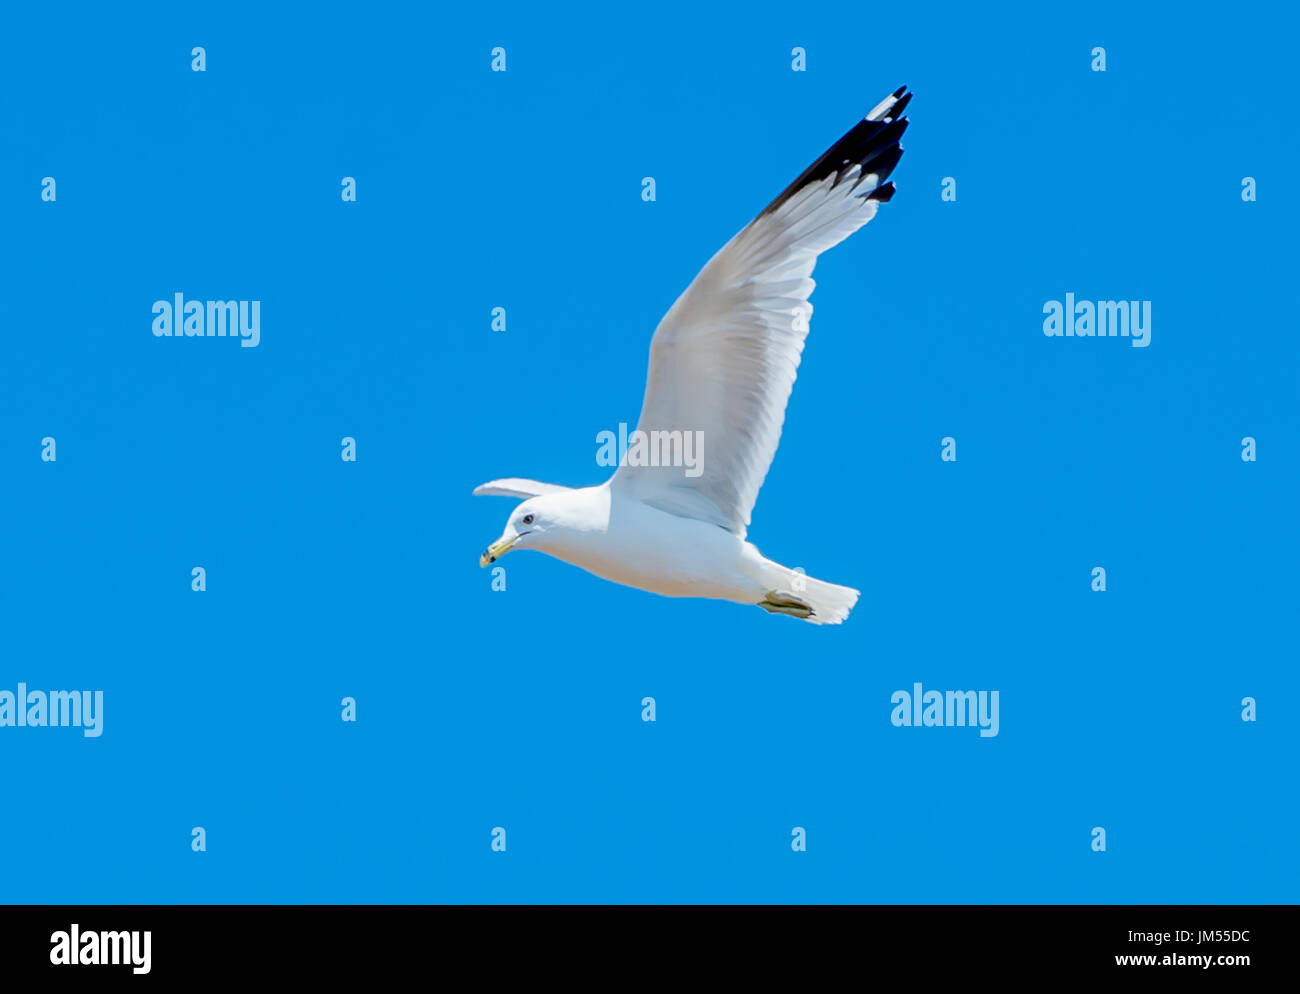 Seagull bird mid air mid flight wings outstretched flying in front of blue sky. Stock Photo